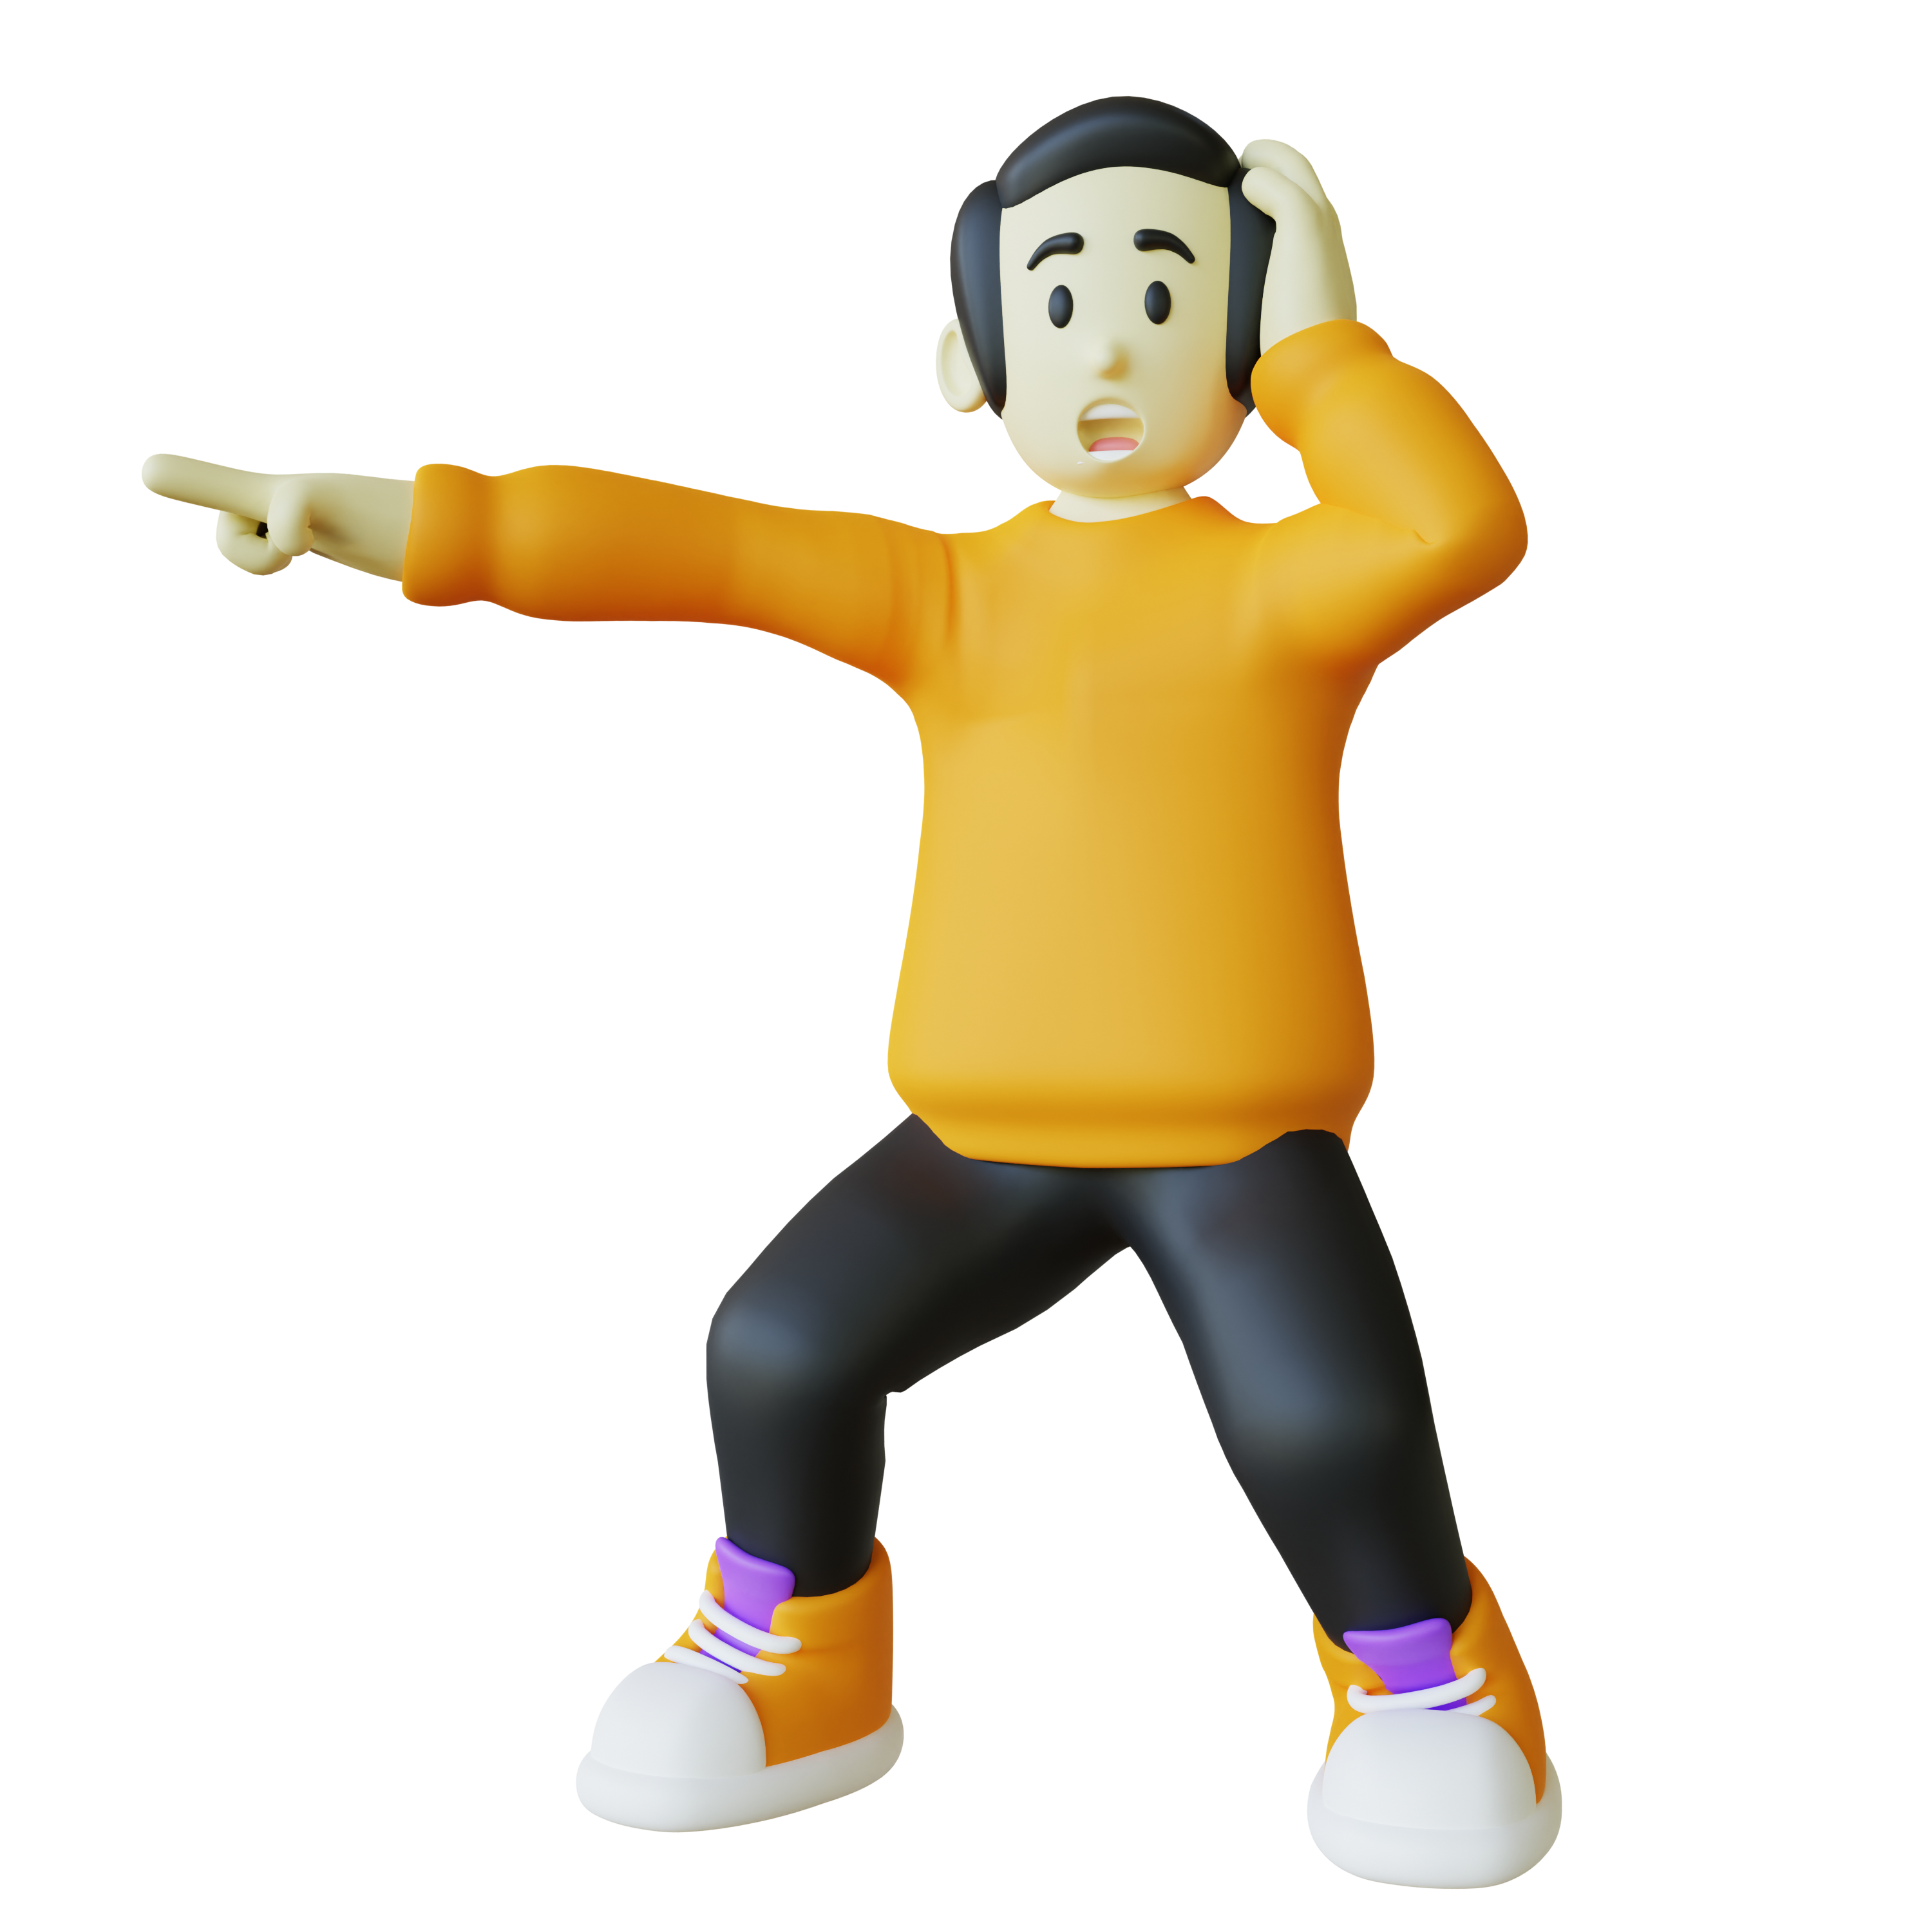 vecteezy_stylized-3d-man-shocked-and-pointing-to-left_10998291_509